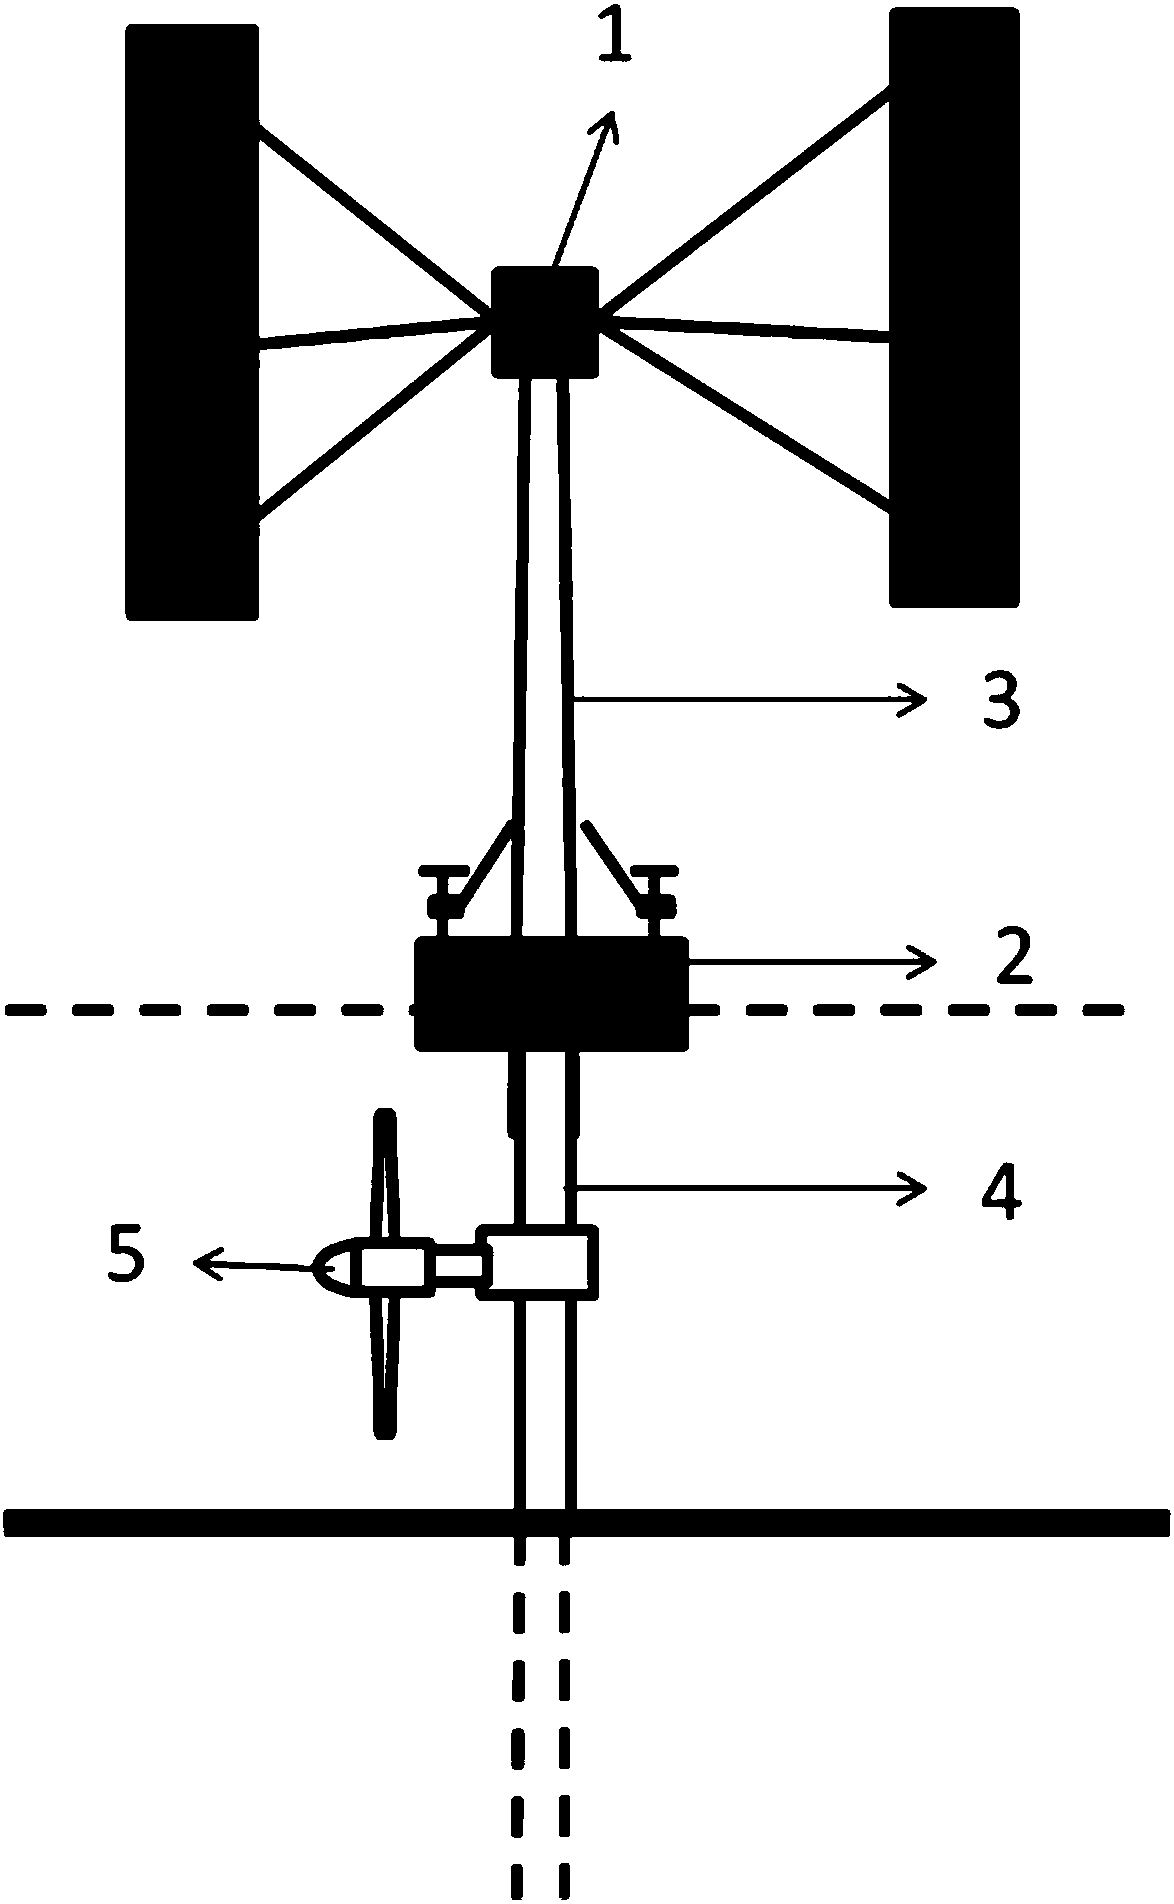 Single pile platform-based vertical axial wind turbine-bidirectional wave energy device-tidal current energy device integration structure